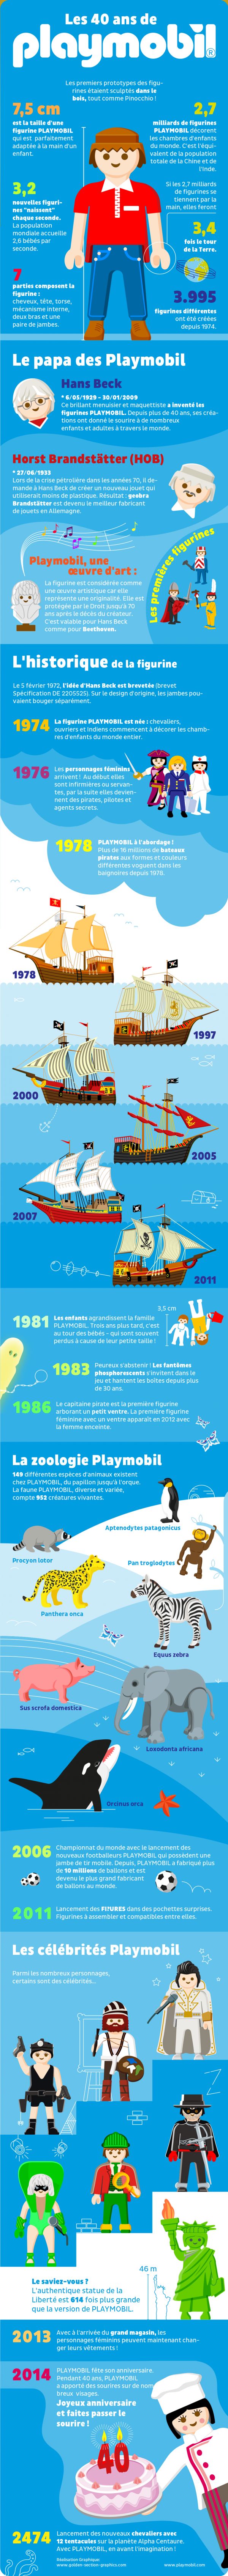 Advertising-Infographics-Playmobil-fete-ses-40-ans Advertising Infographics : Playmobil fête ses 40 ans